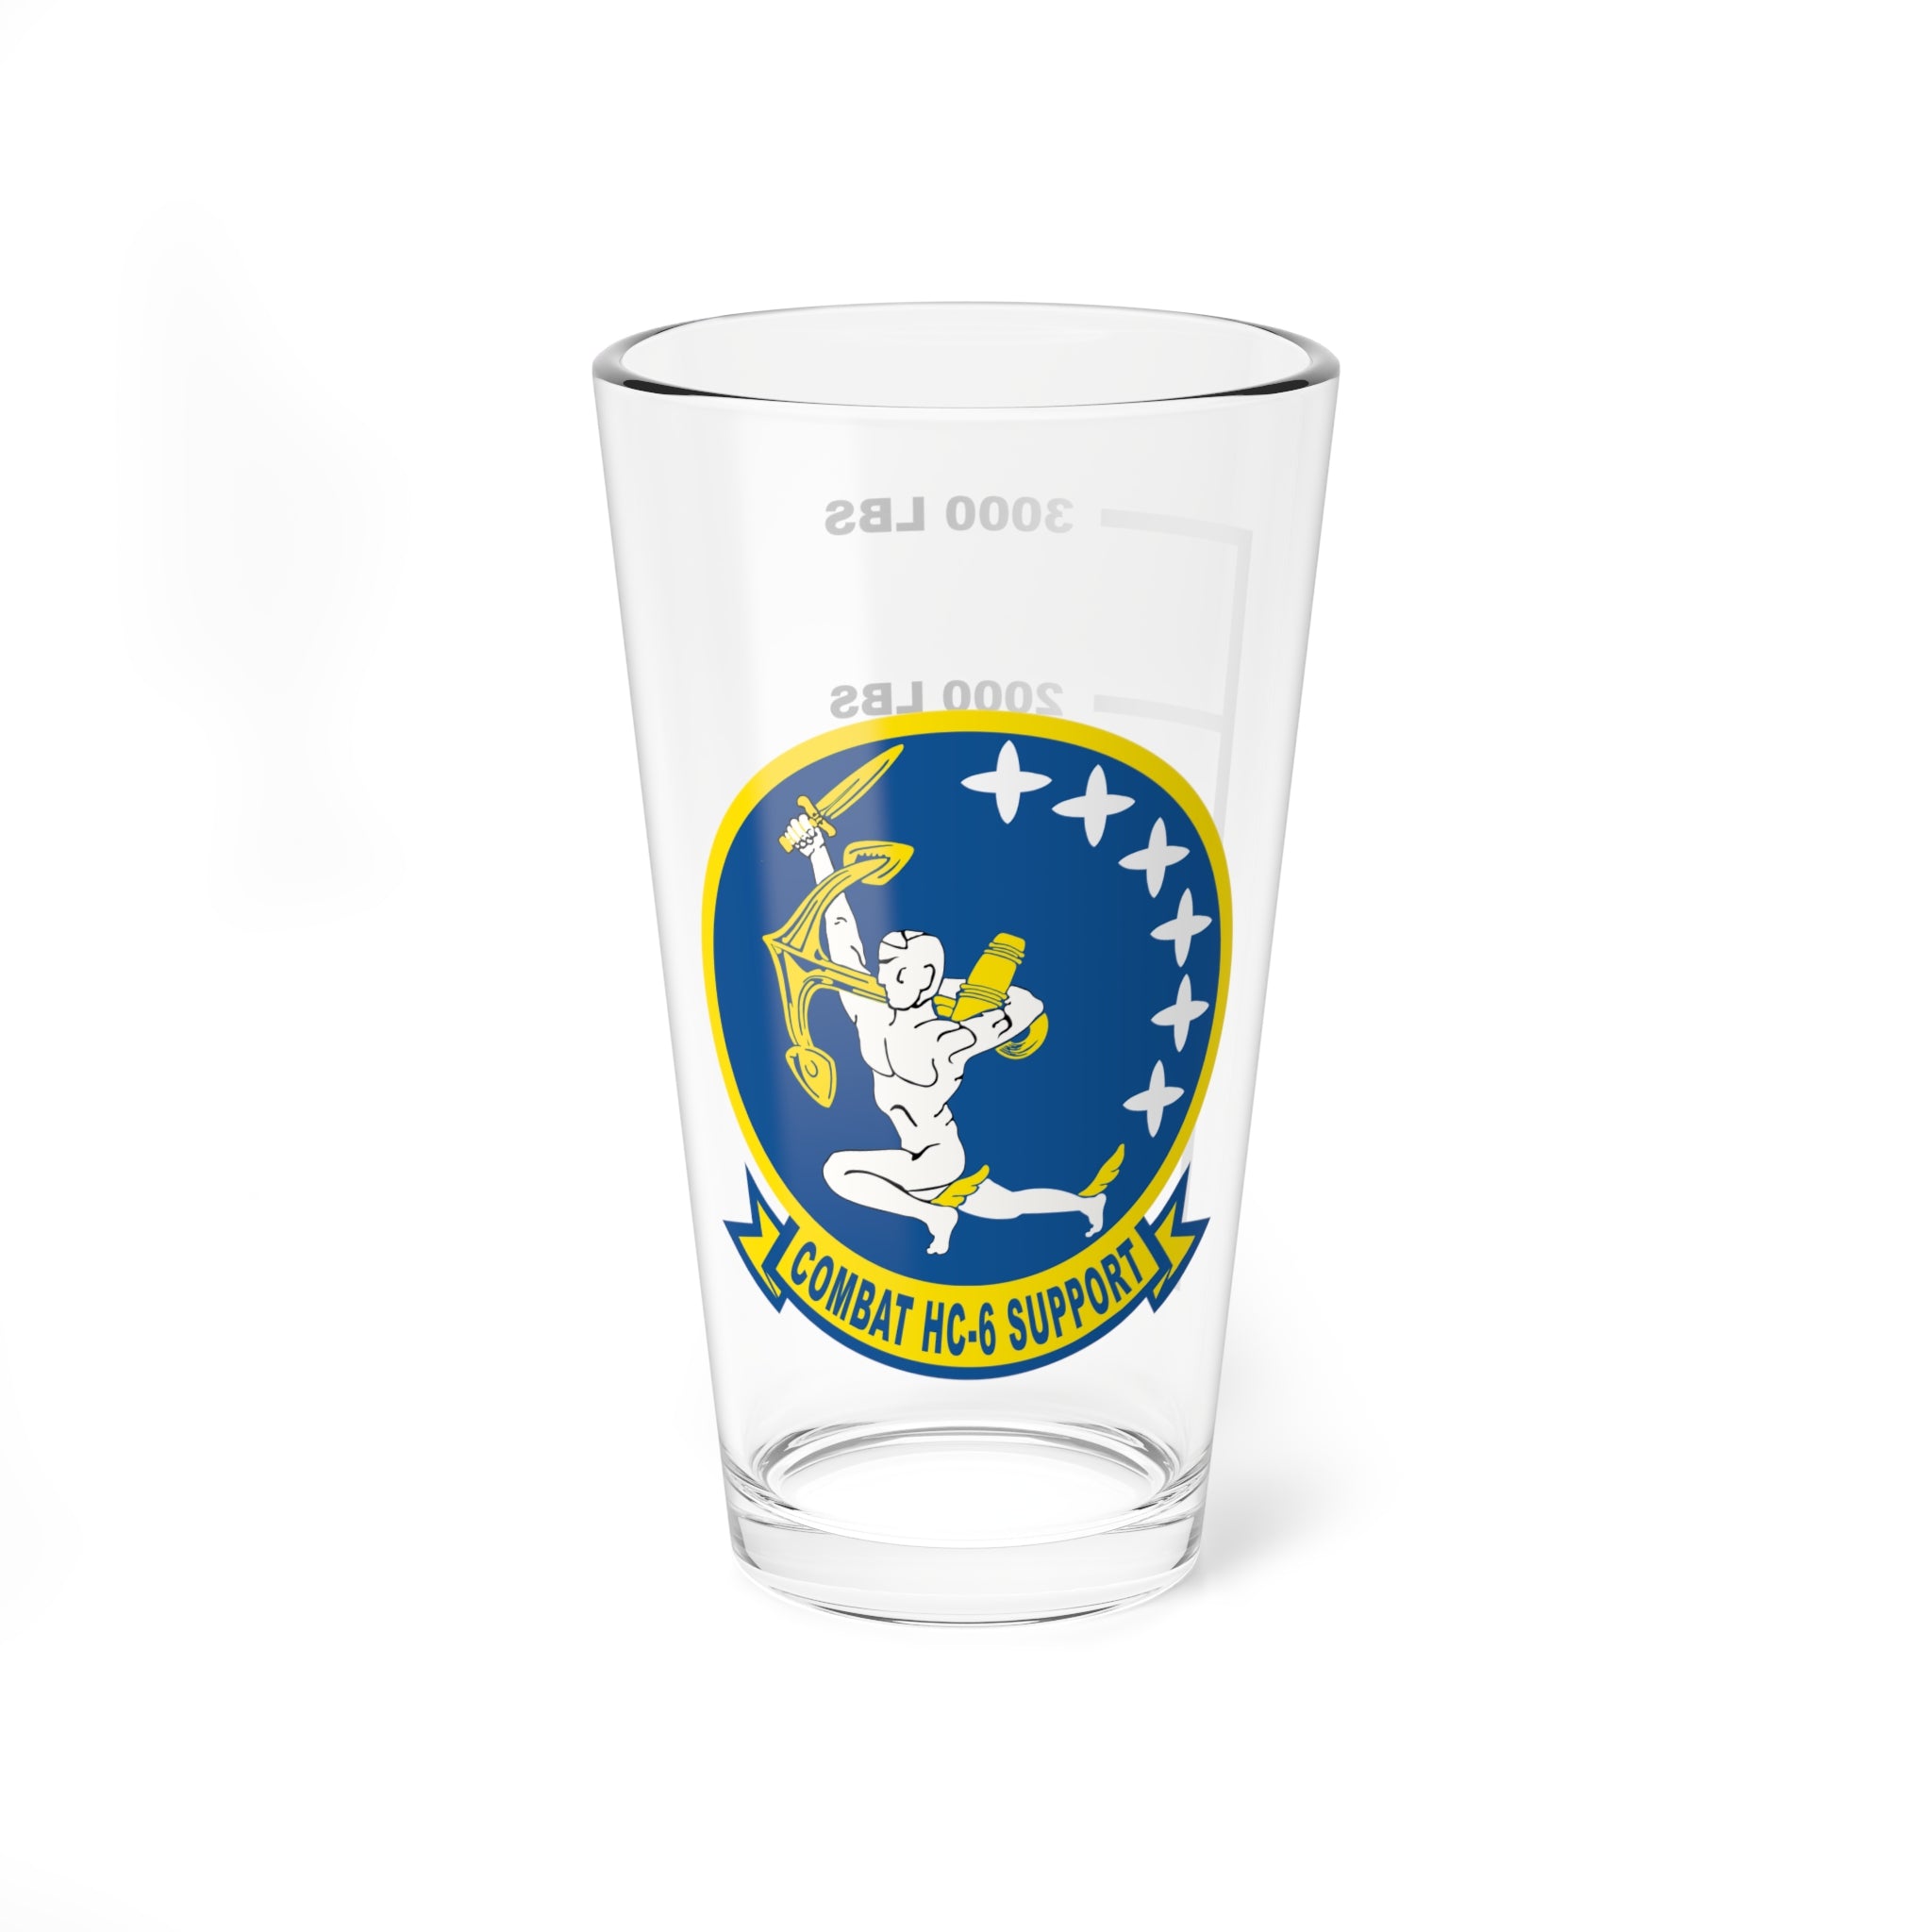 HC-6 "Chargers" Fuel Low Pint Glass, Navy Helicopter Fleet Support Squadron flying the CH-46 Sea Knight